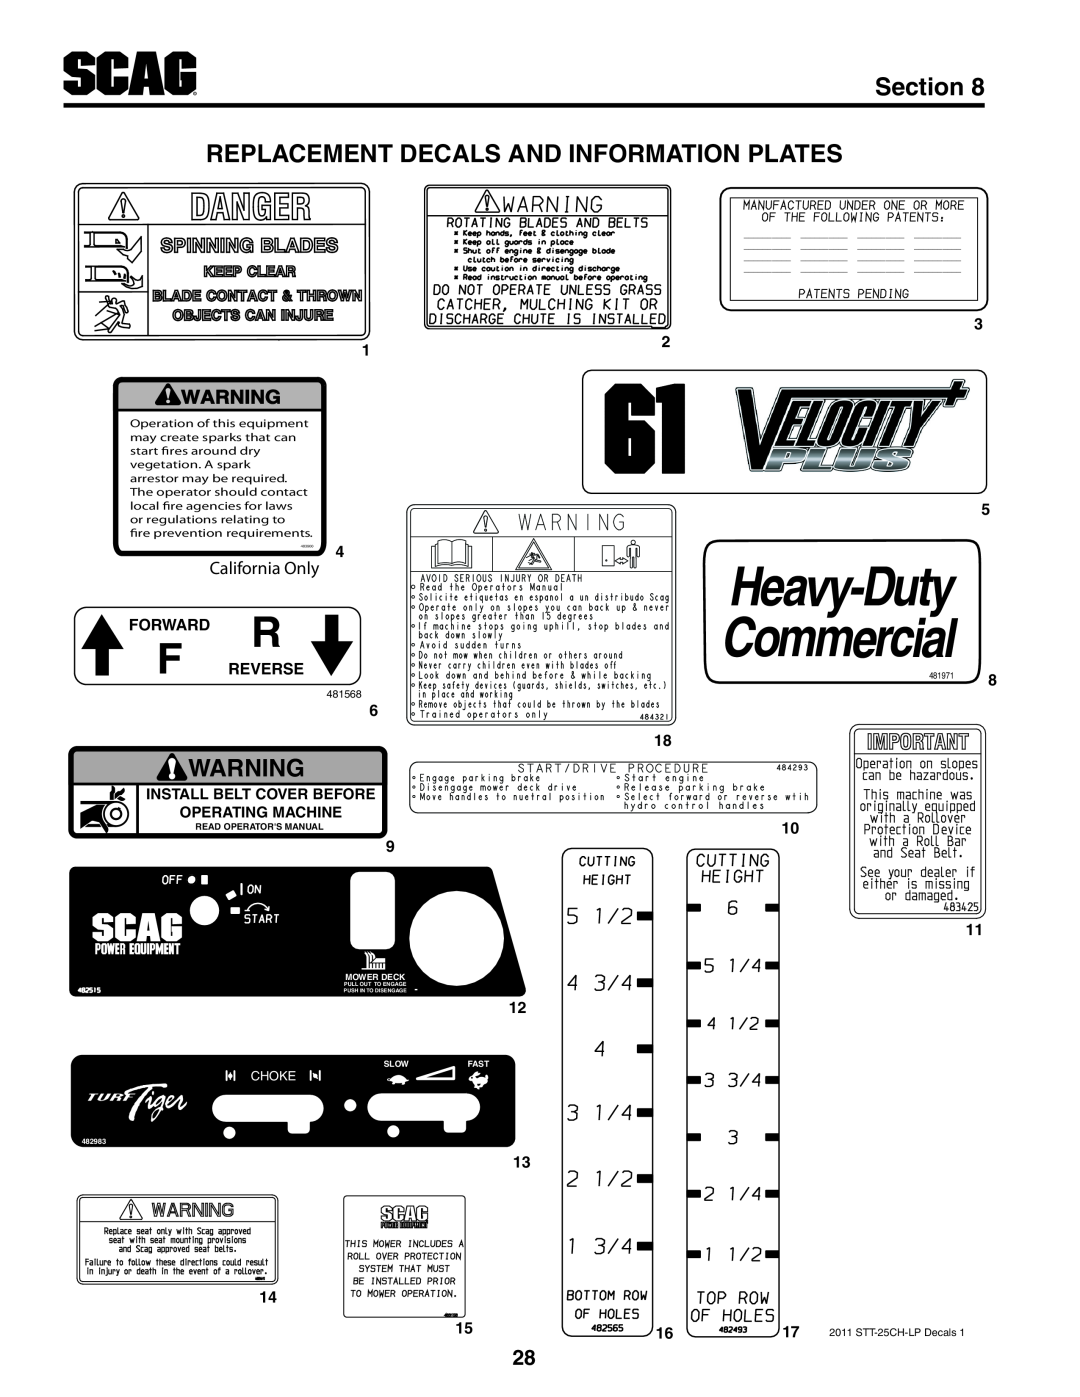 Scag Power Equipment STT-25CH-LP manual Replacement Decals And Information Plates, Heavy-Duty Commercial, Section 